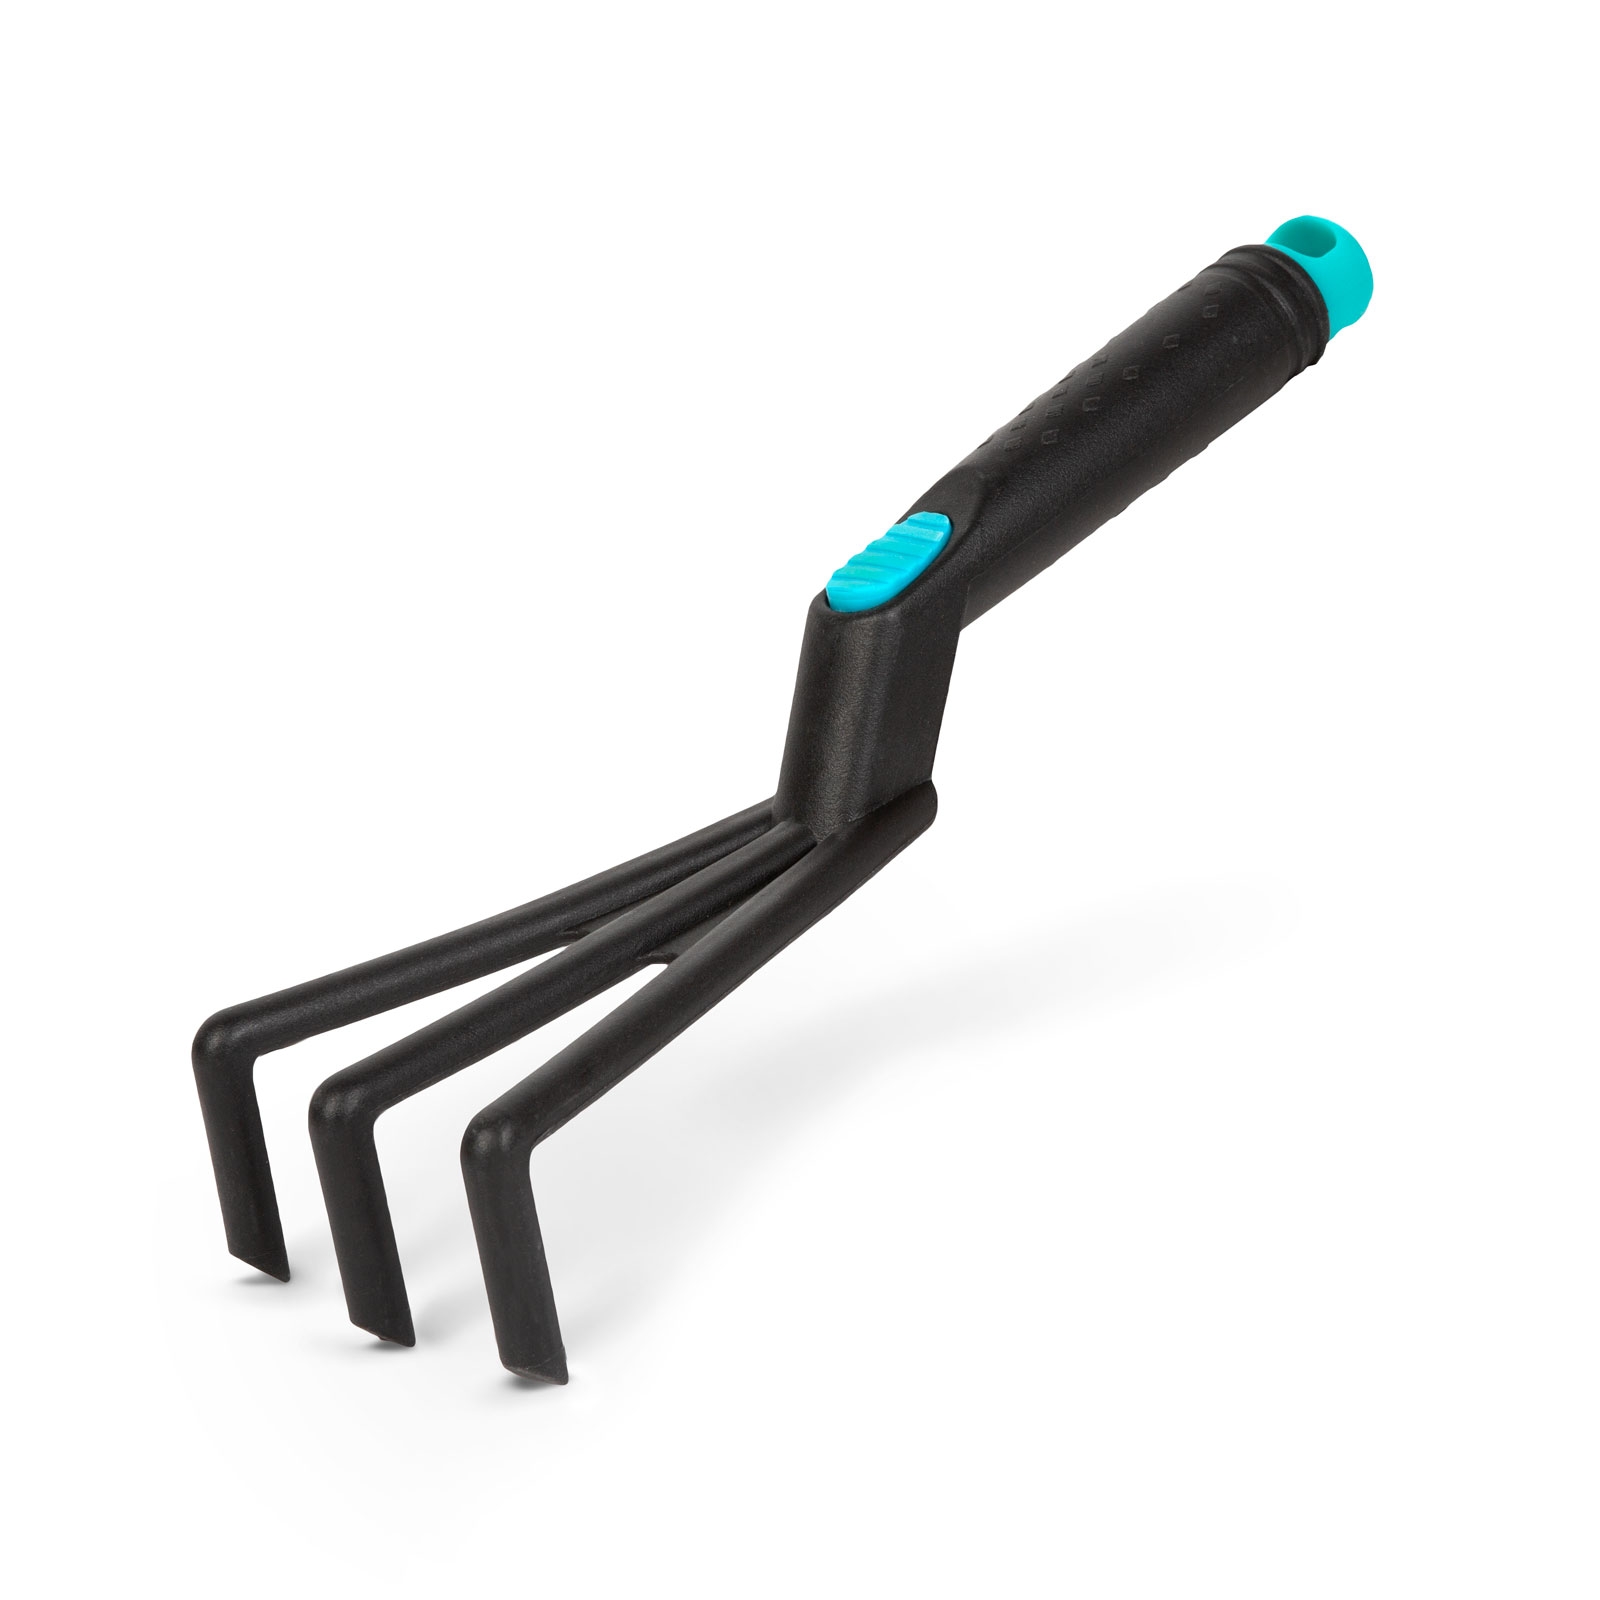 Handheld forked cultivator thumb